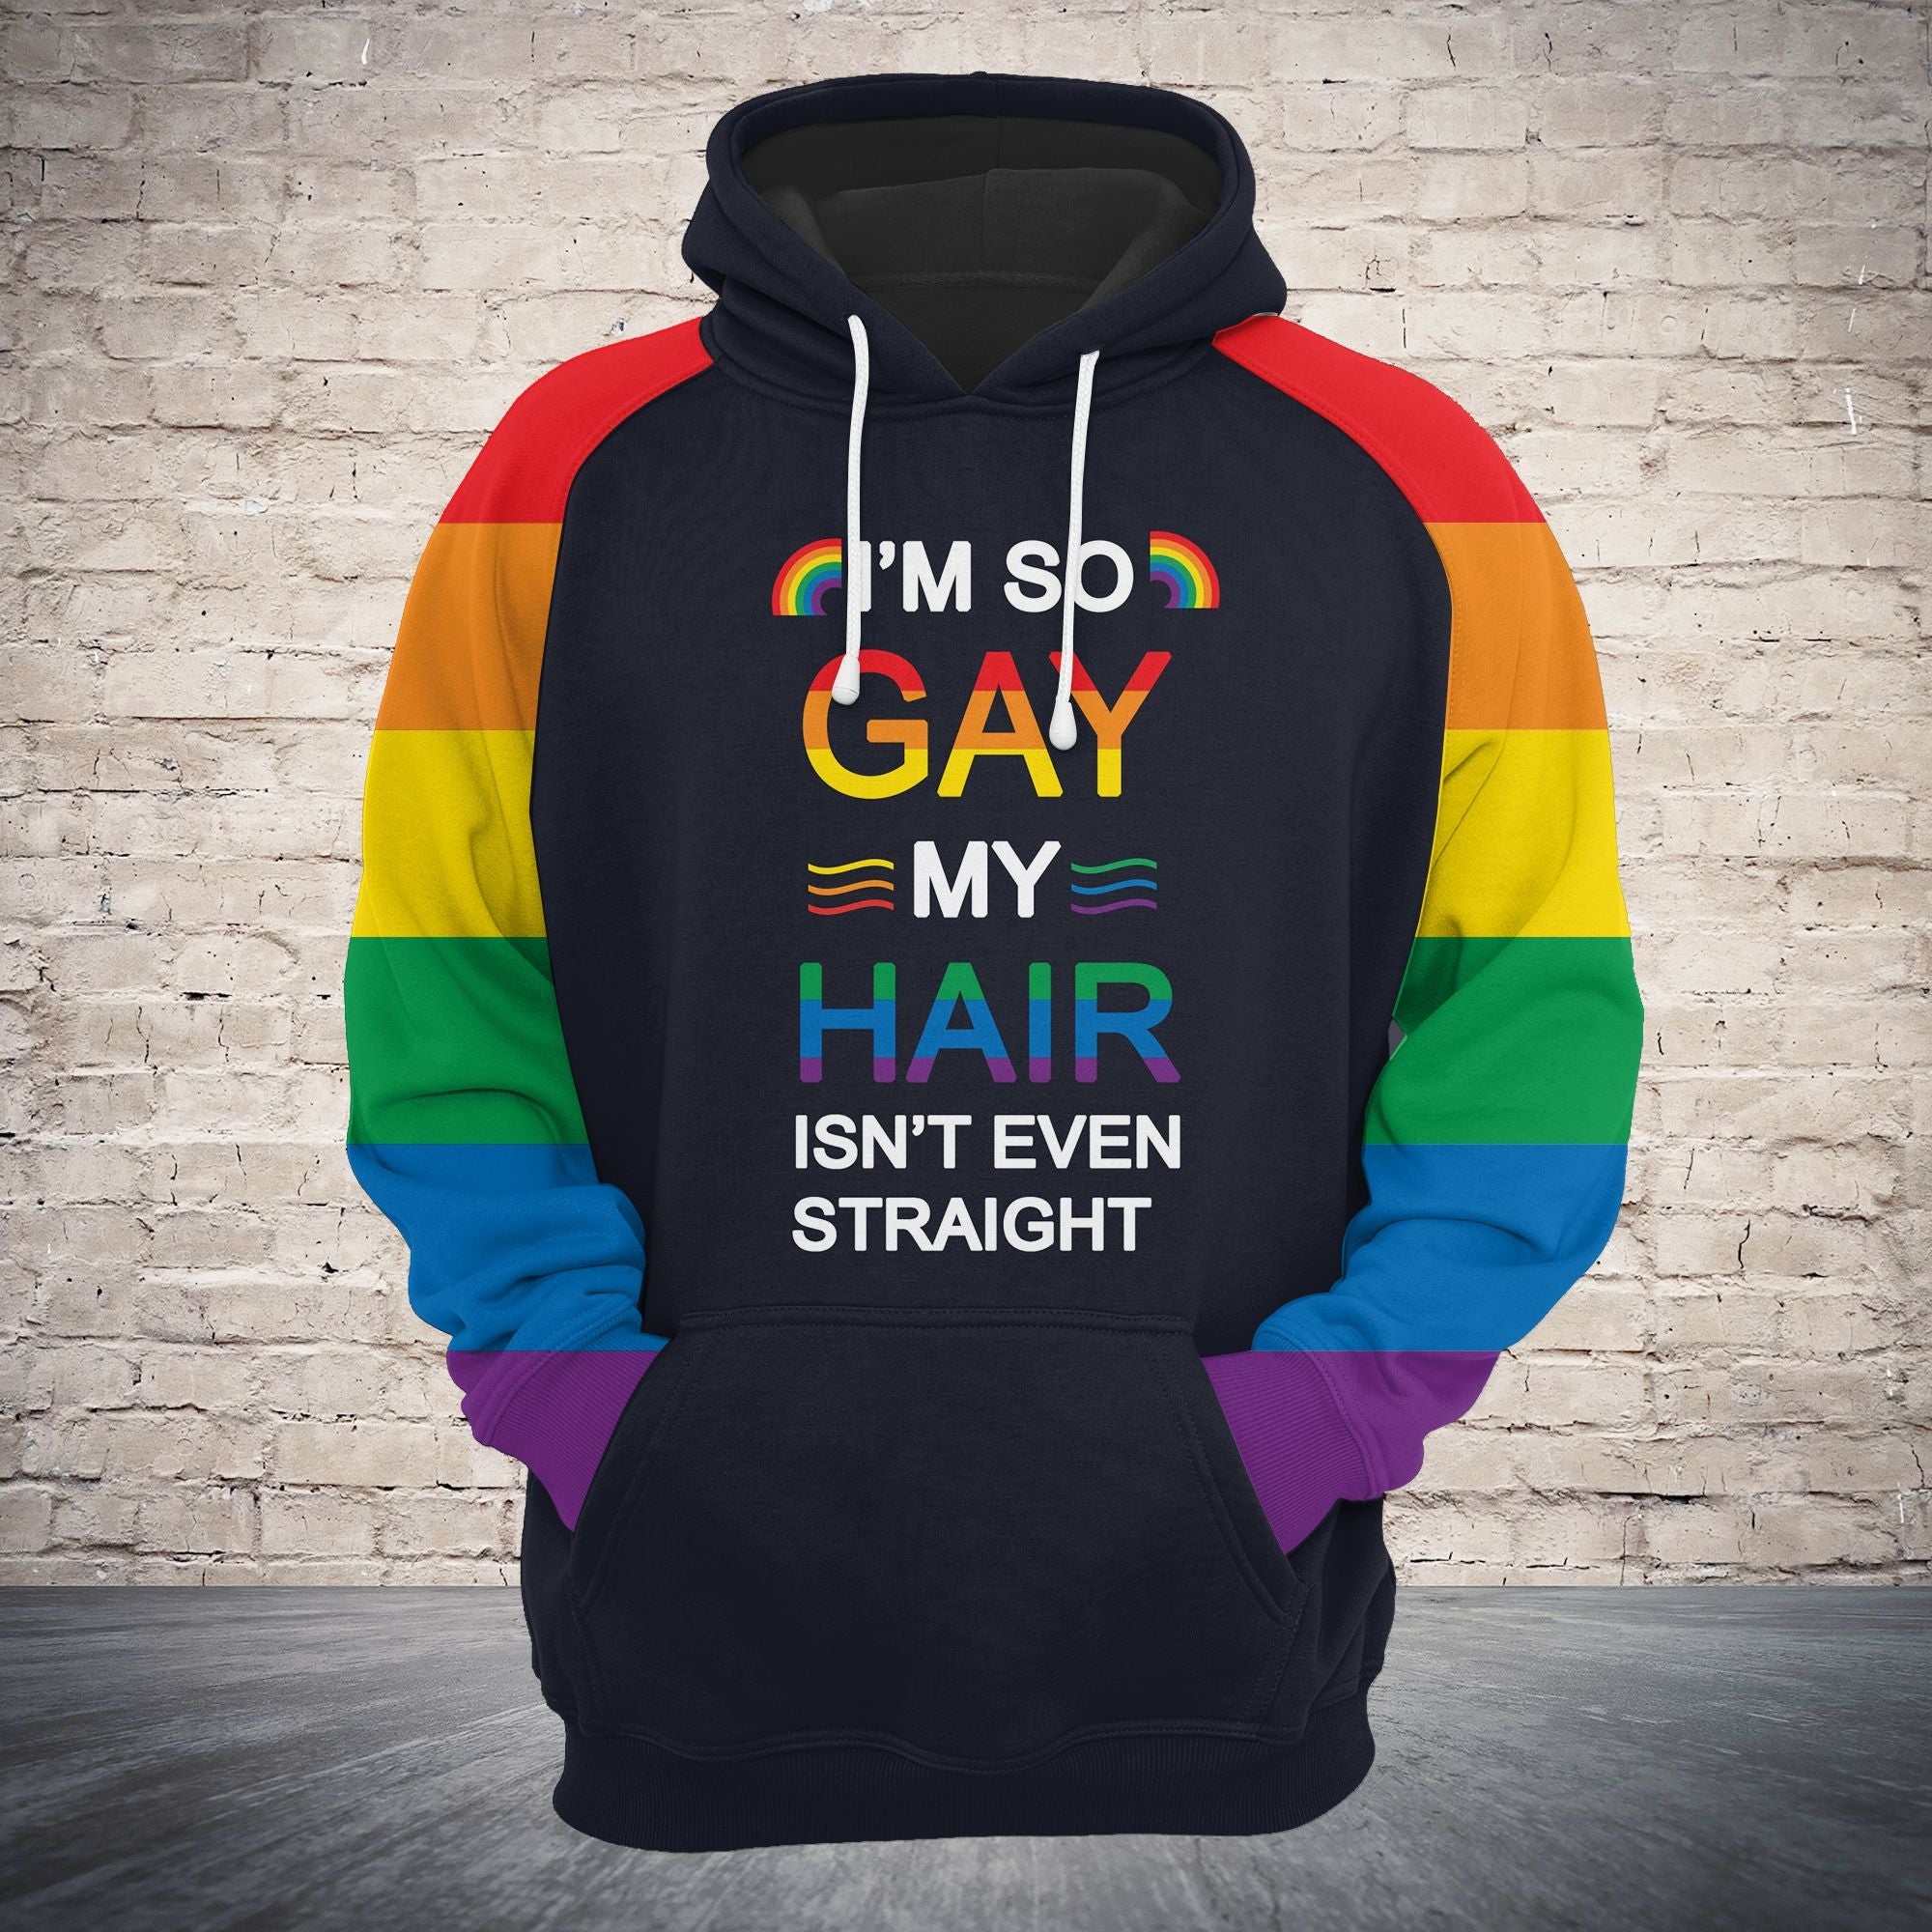 LGBT Pullover Premium Hoodie I'm So Gay My Hair, Perfect Outfit For Men And Women On Christmas New Year Autumn Winter